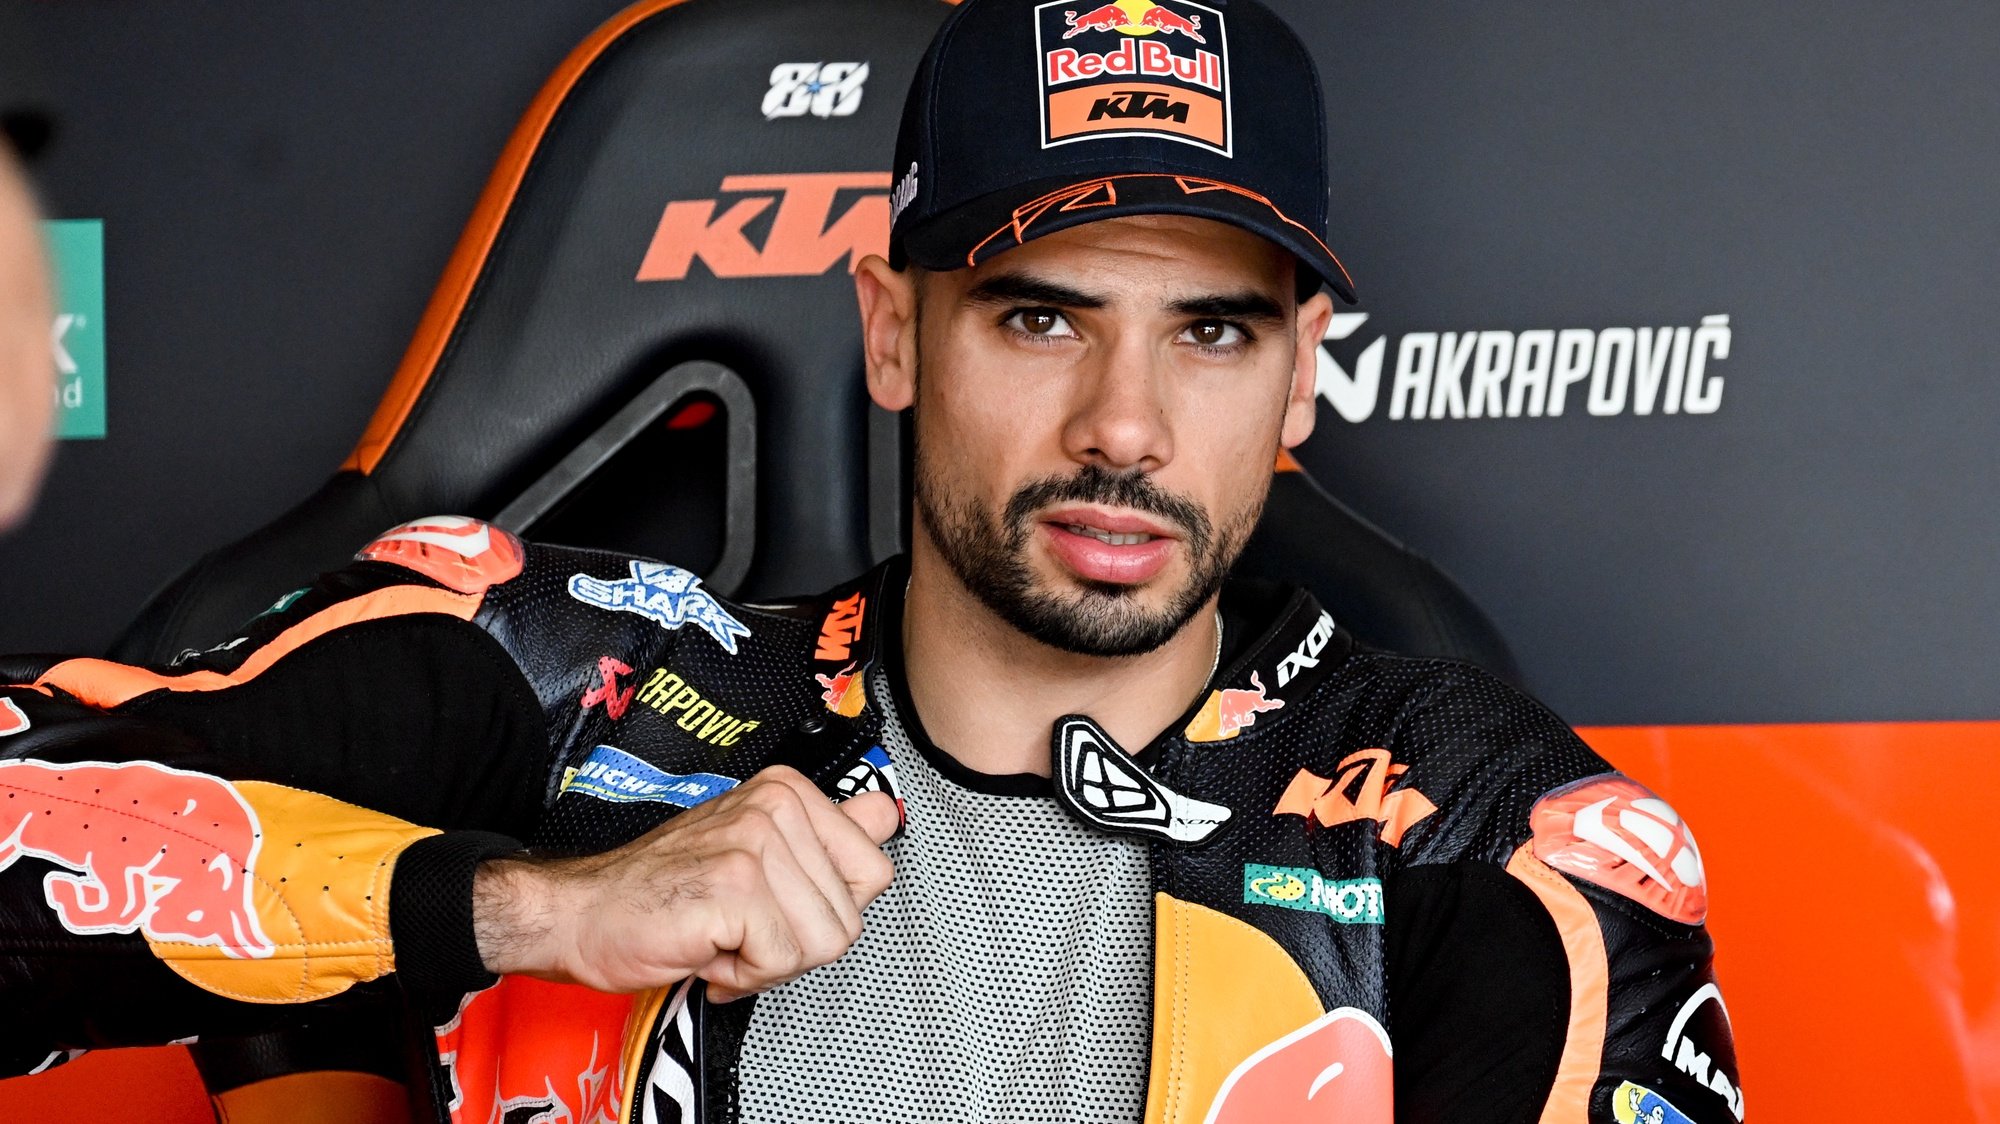 epa10019613 Portuguese Moto GP rider Miguel Oliveira of Red Bull KTM Factory Racing team during the free practice session of the motorcycling Grand Prix of Germany at the Sachsenring racing circuit in Hohenstein-Ernstthal, Germany, 18 June 2022. The Motorcycling Grand Prix of Germany takes place on 19 June.  EPA/FILIP SINGER